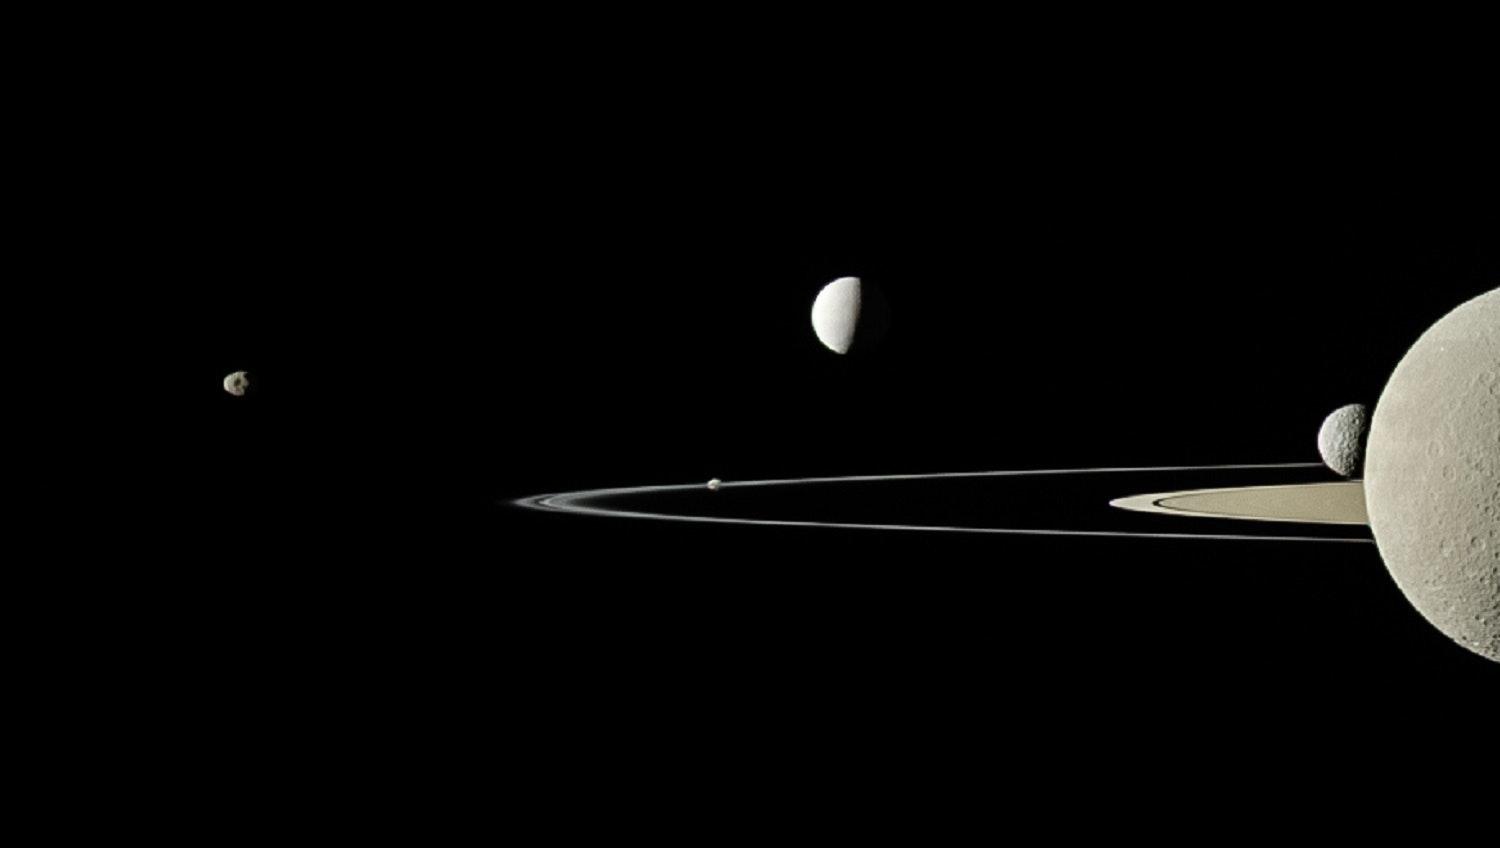 Side view image of Saturn, its rings, and its moons